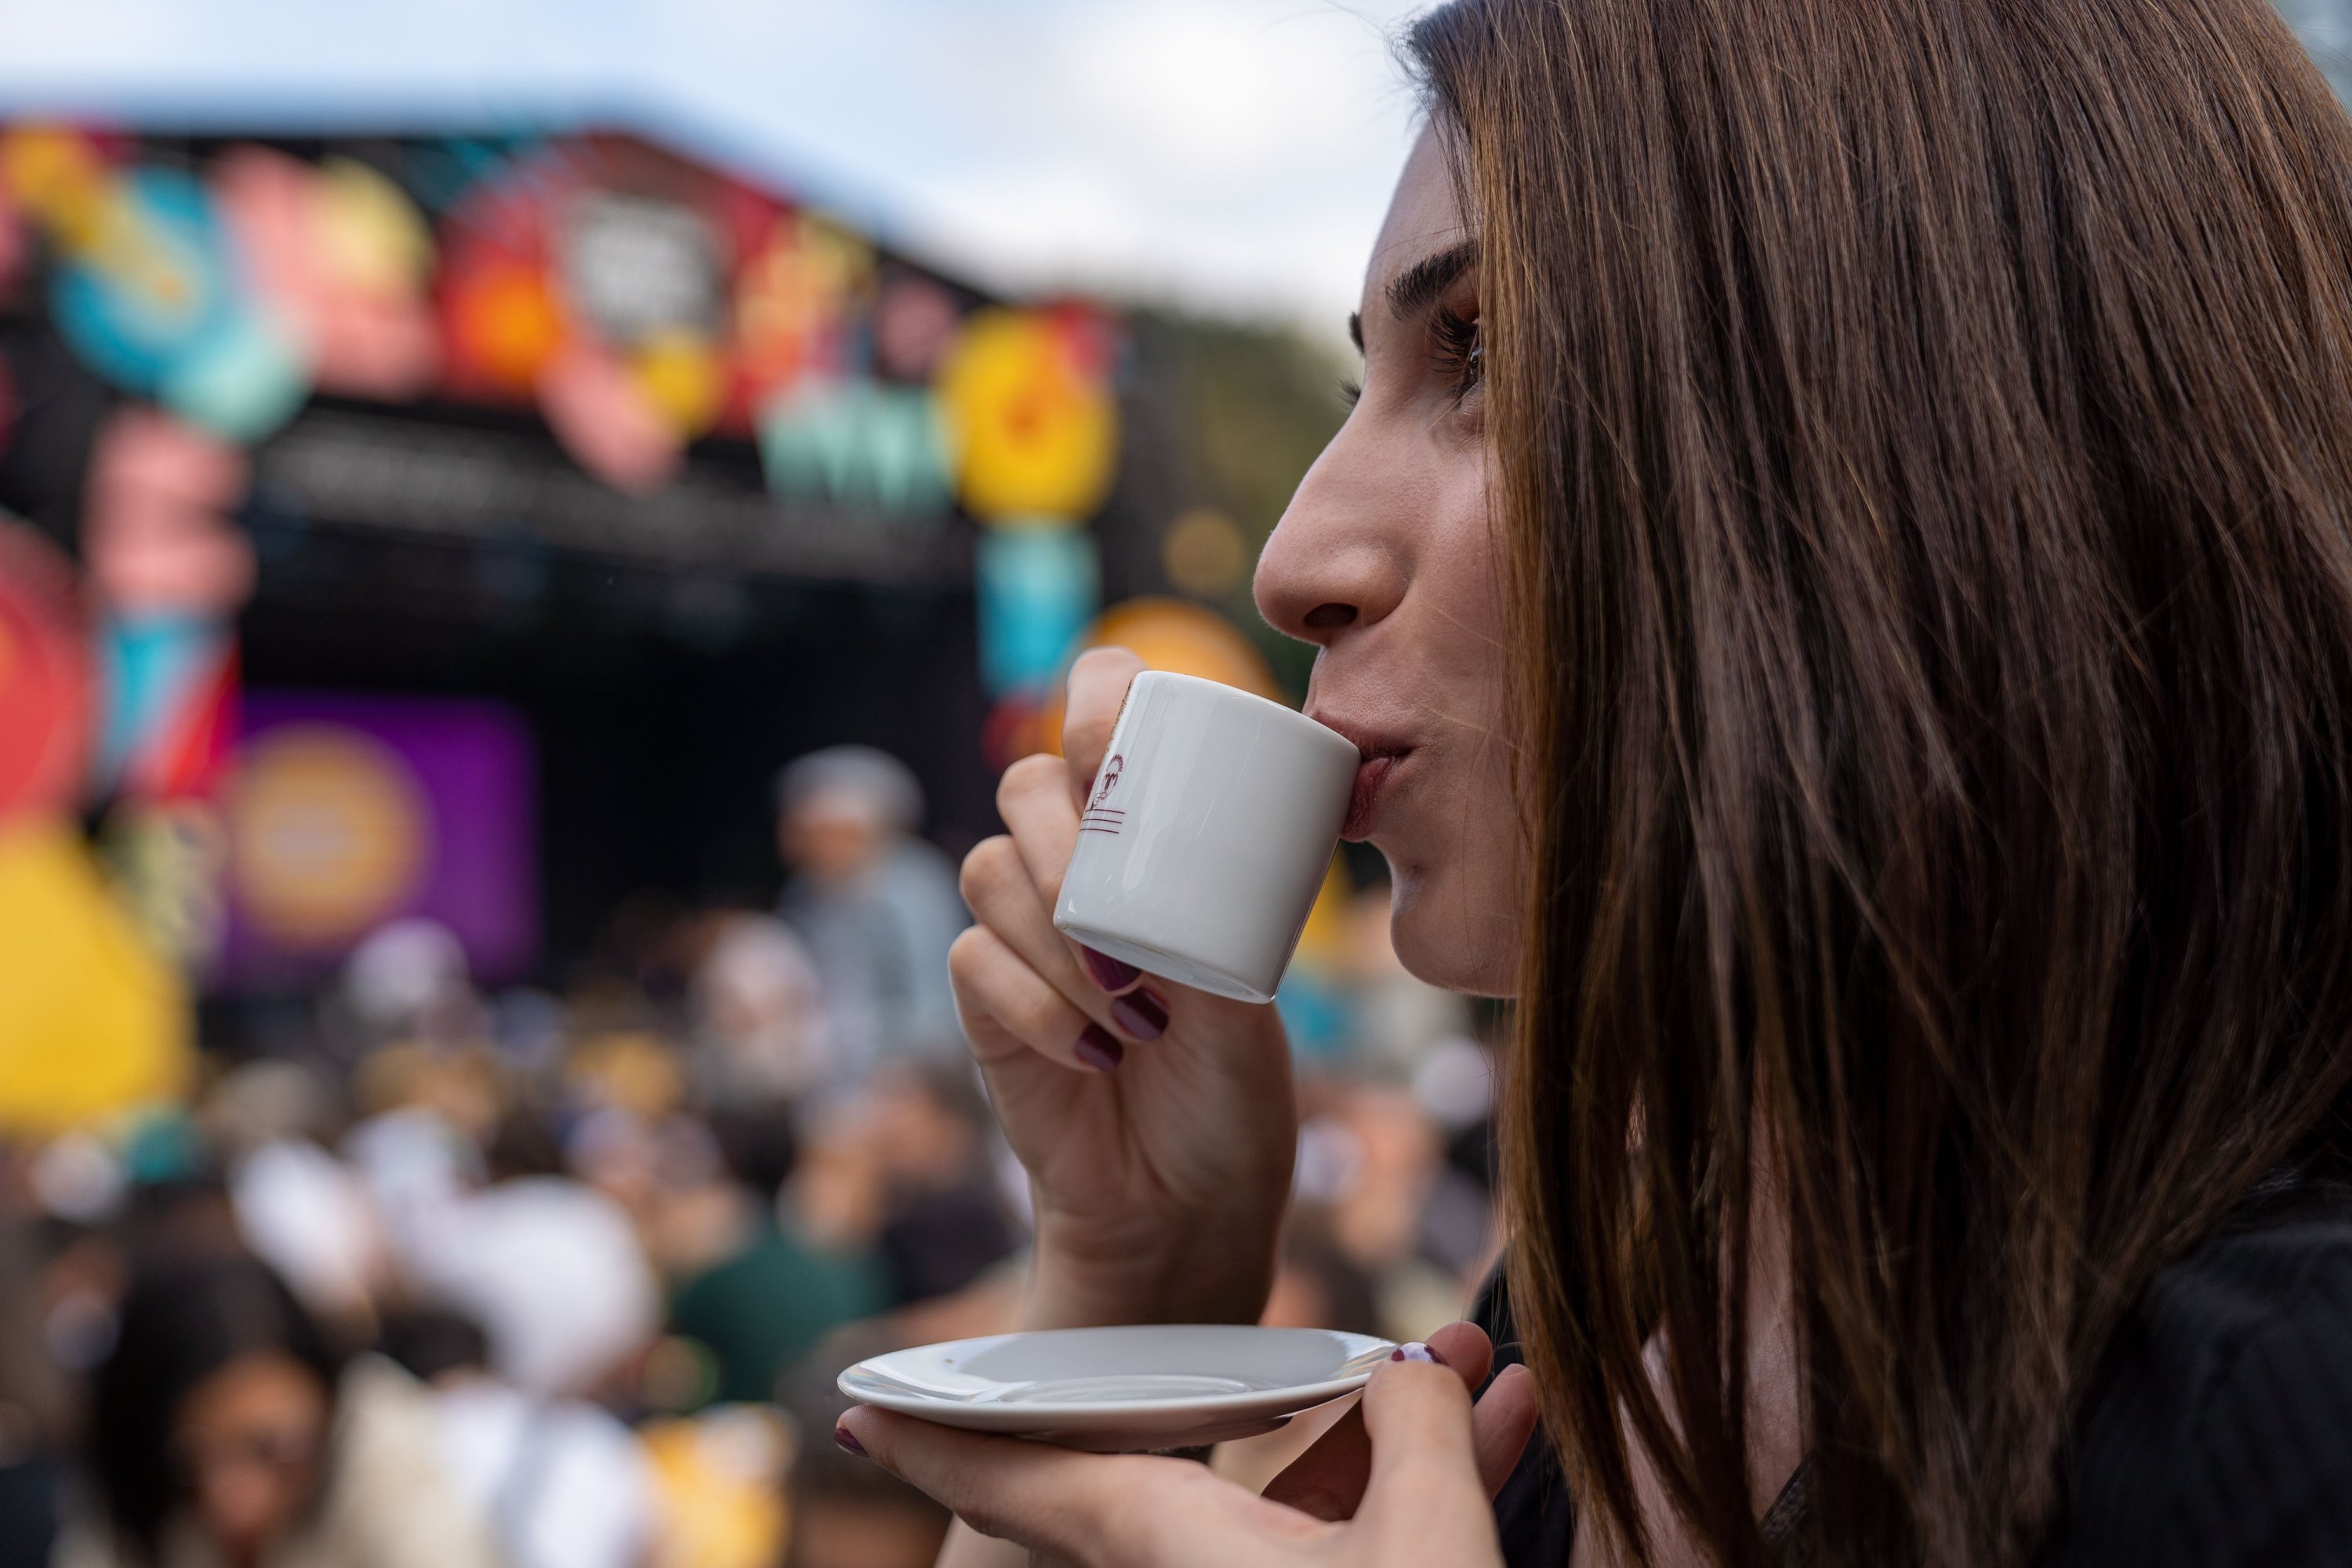 Coffee lovers are having fun at the festival, Sept. 29, 2019. (Photo courtesy of the organization)